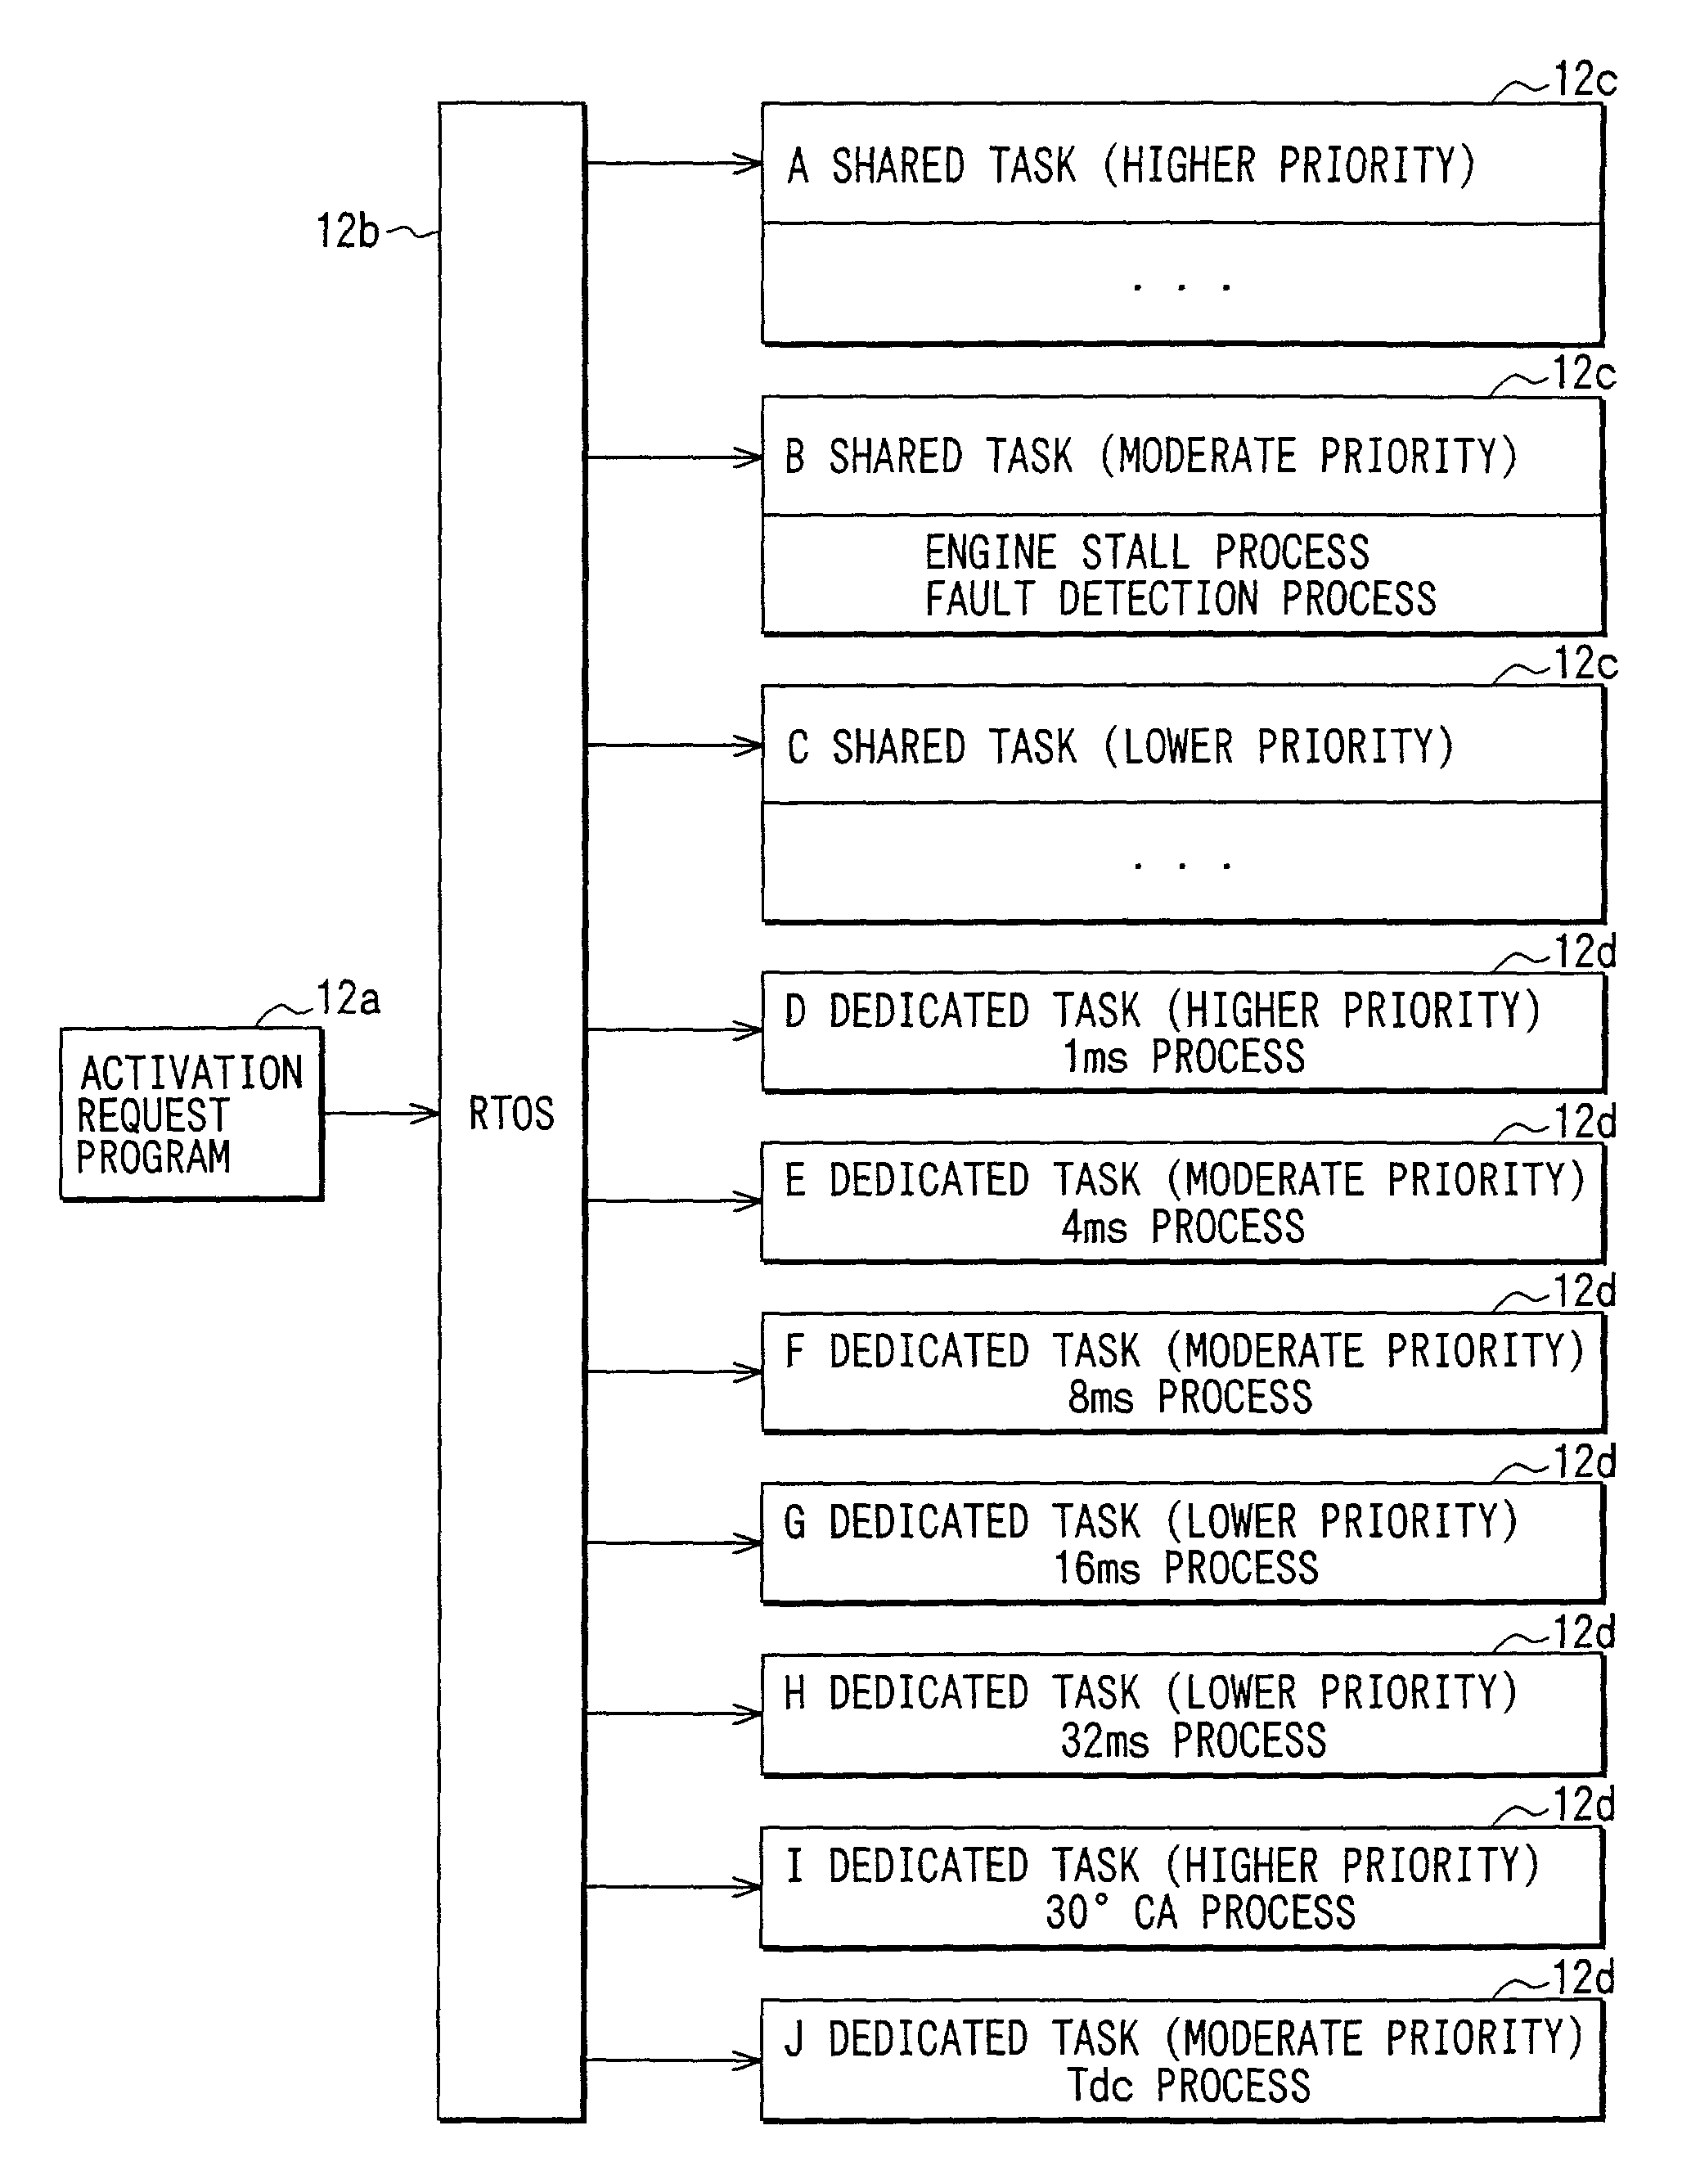 Processor unit for executing event process in real time in response to occurrence of event